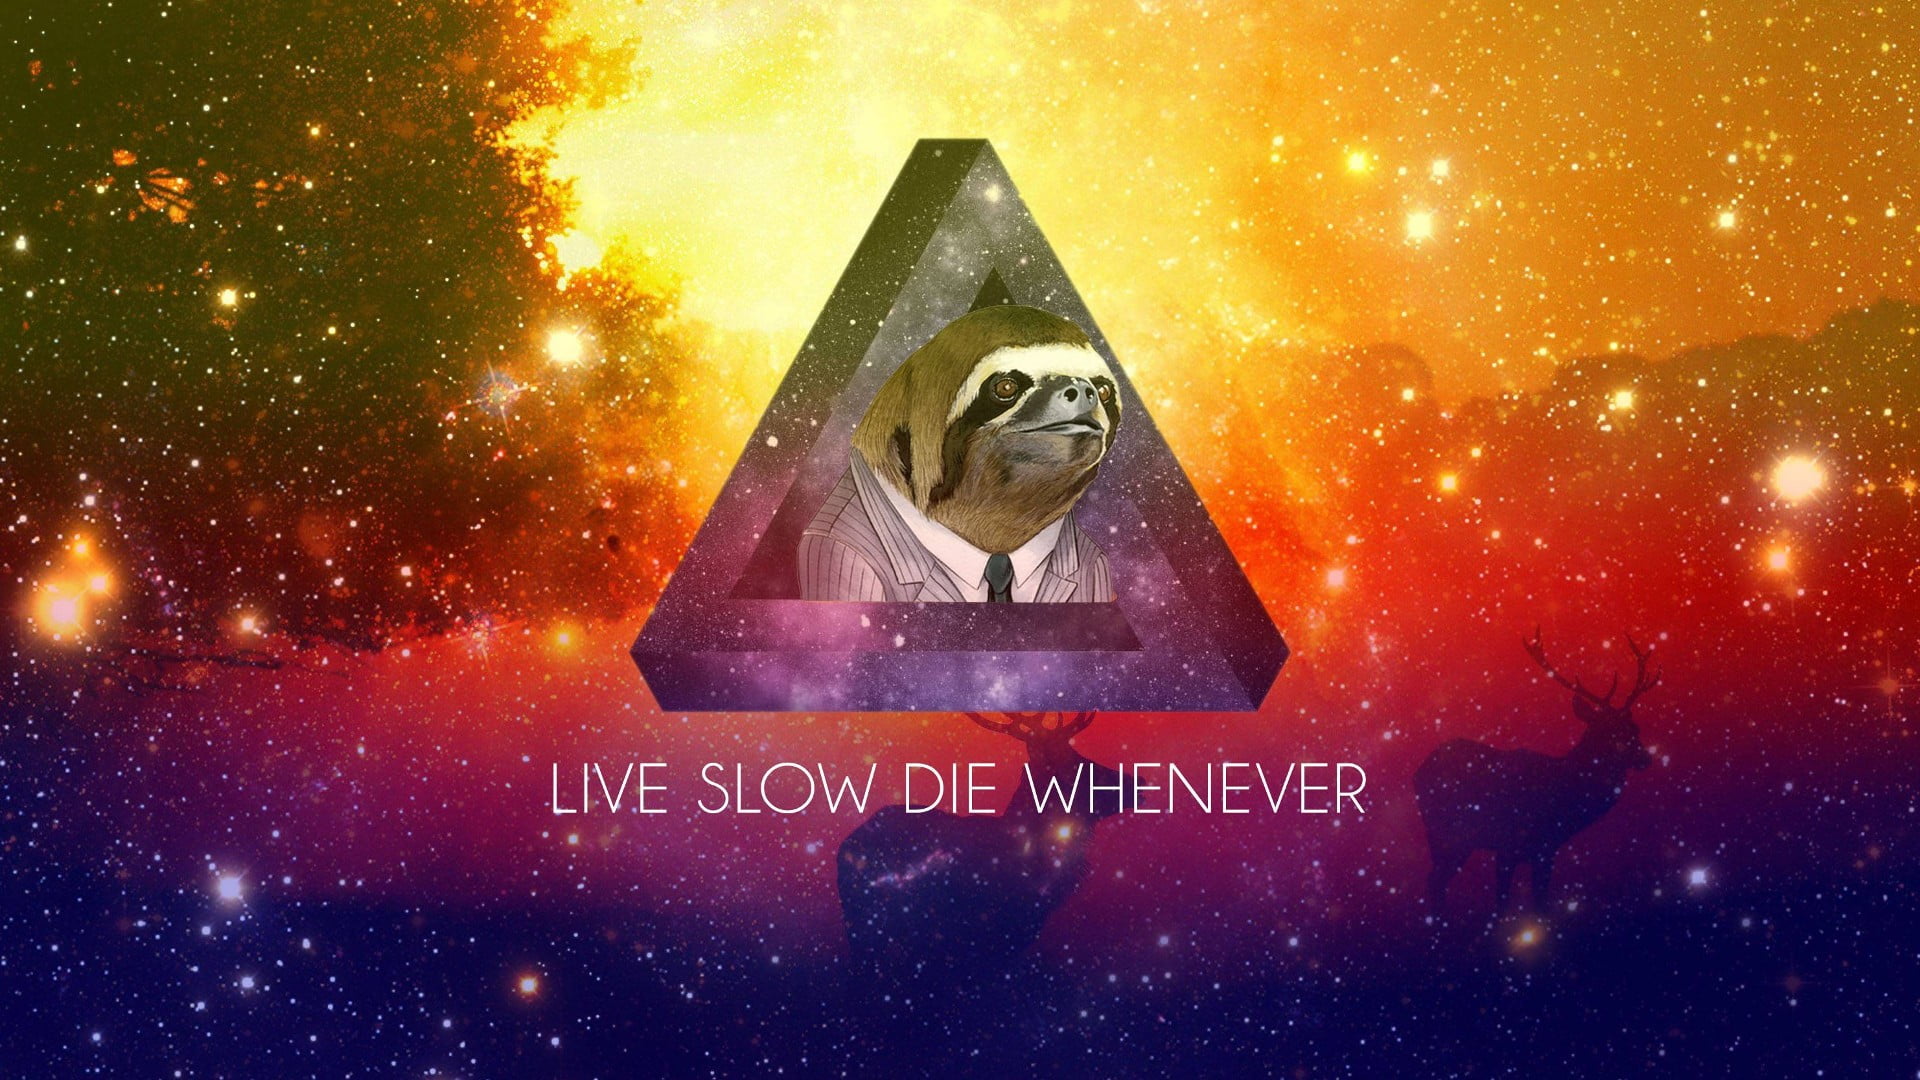 Beach With Live Slow Die Whenever Text Overlay Motivational Sloths Humor Artwork Hd Wallpaper Wallpaper Flare